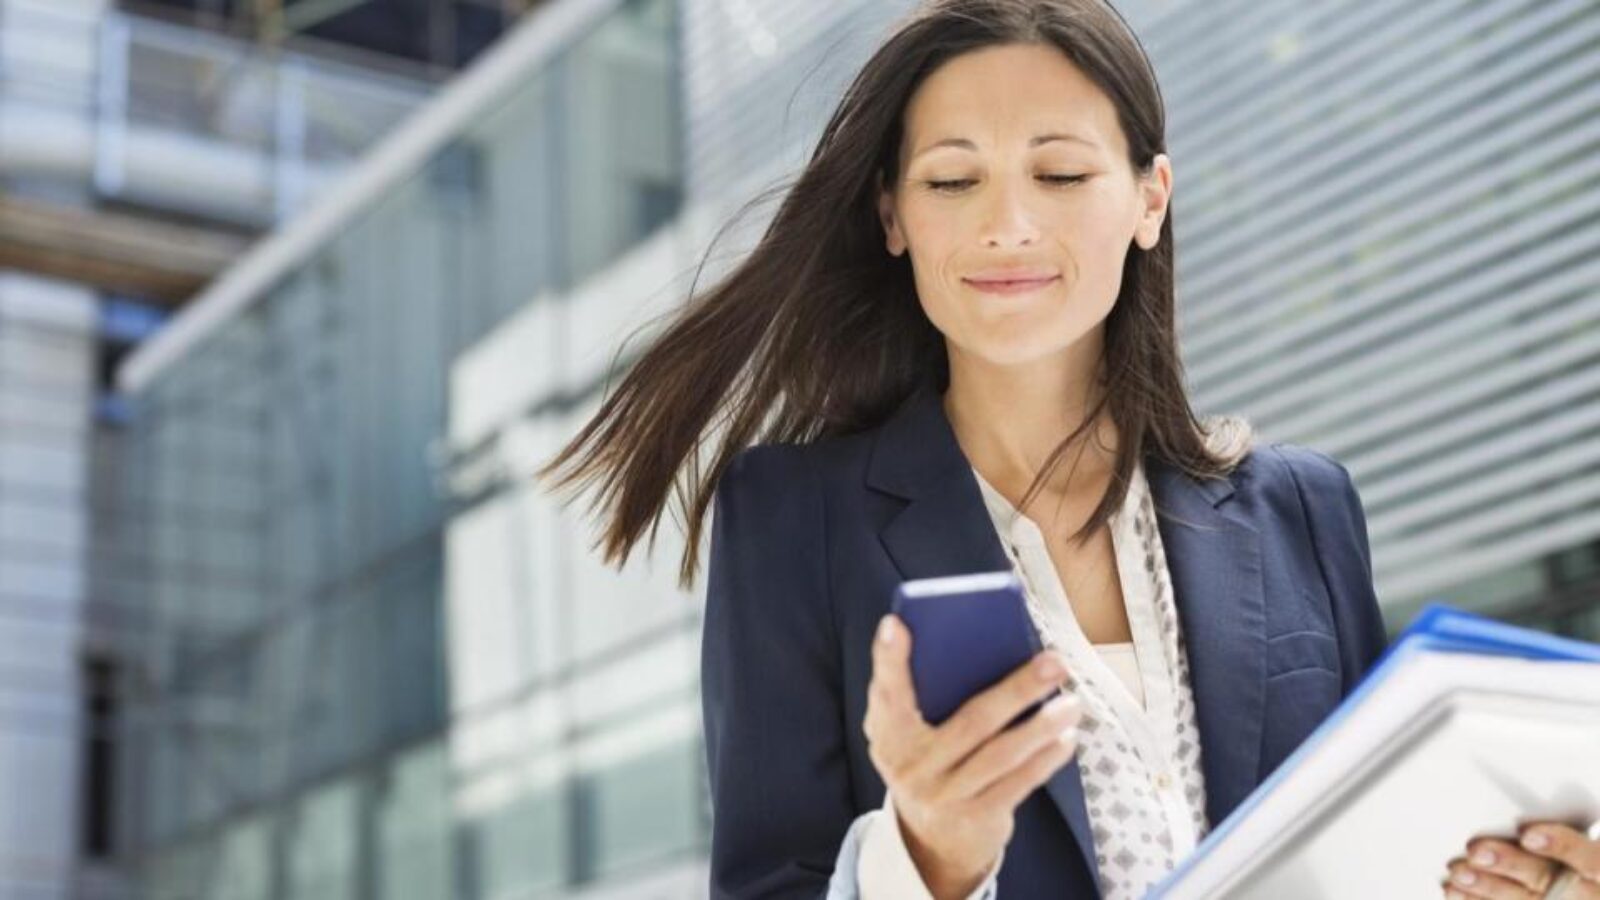 A businesswoman looks at a digital ad on her smartphone